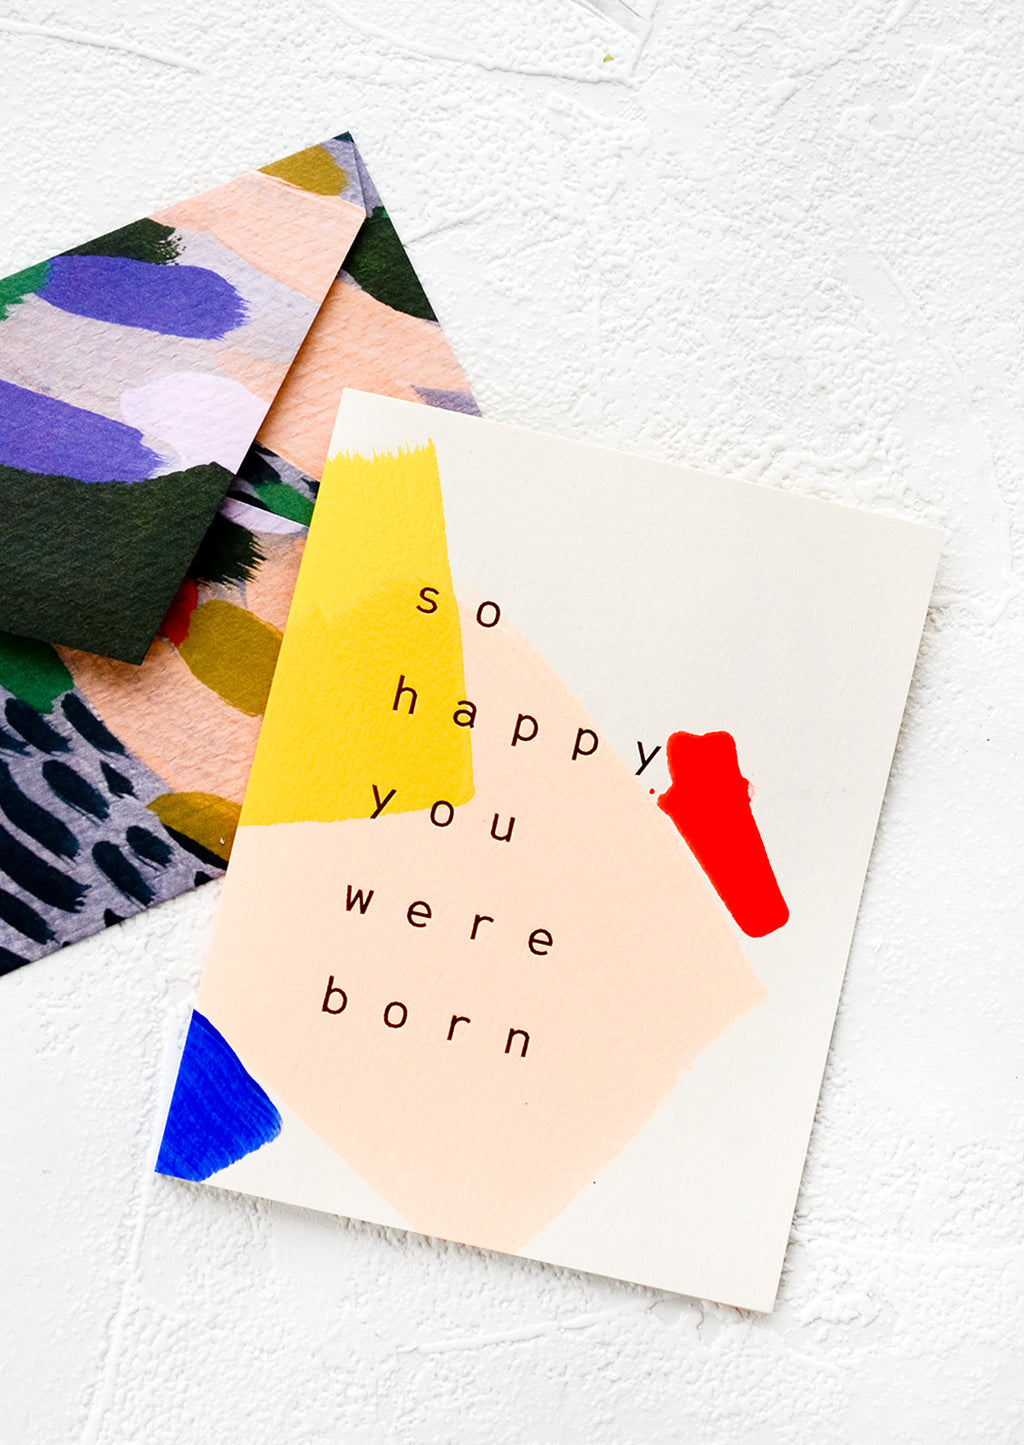 1: A greeting card with hand-painted geometric shapes and text reading "So happy you were born"